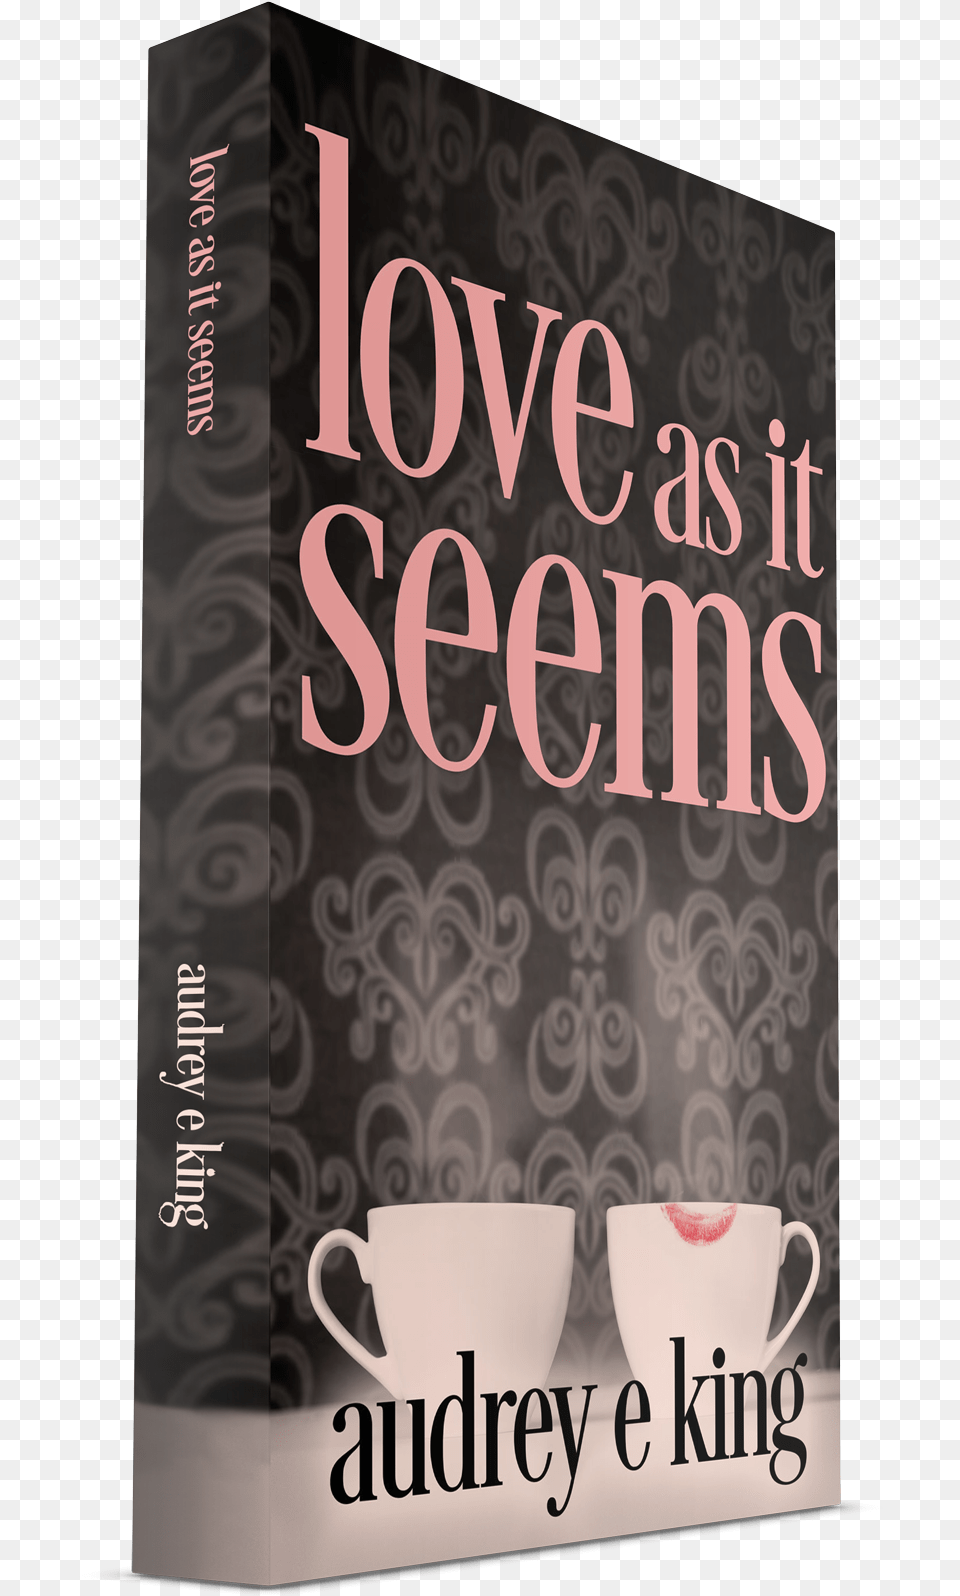 Print Cover For Love As It Seems By Audrey E Poster, Book, Publication, Cup, Novel Png